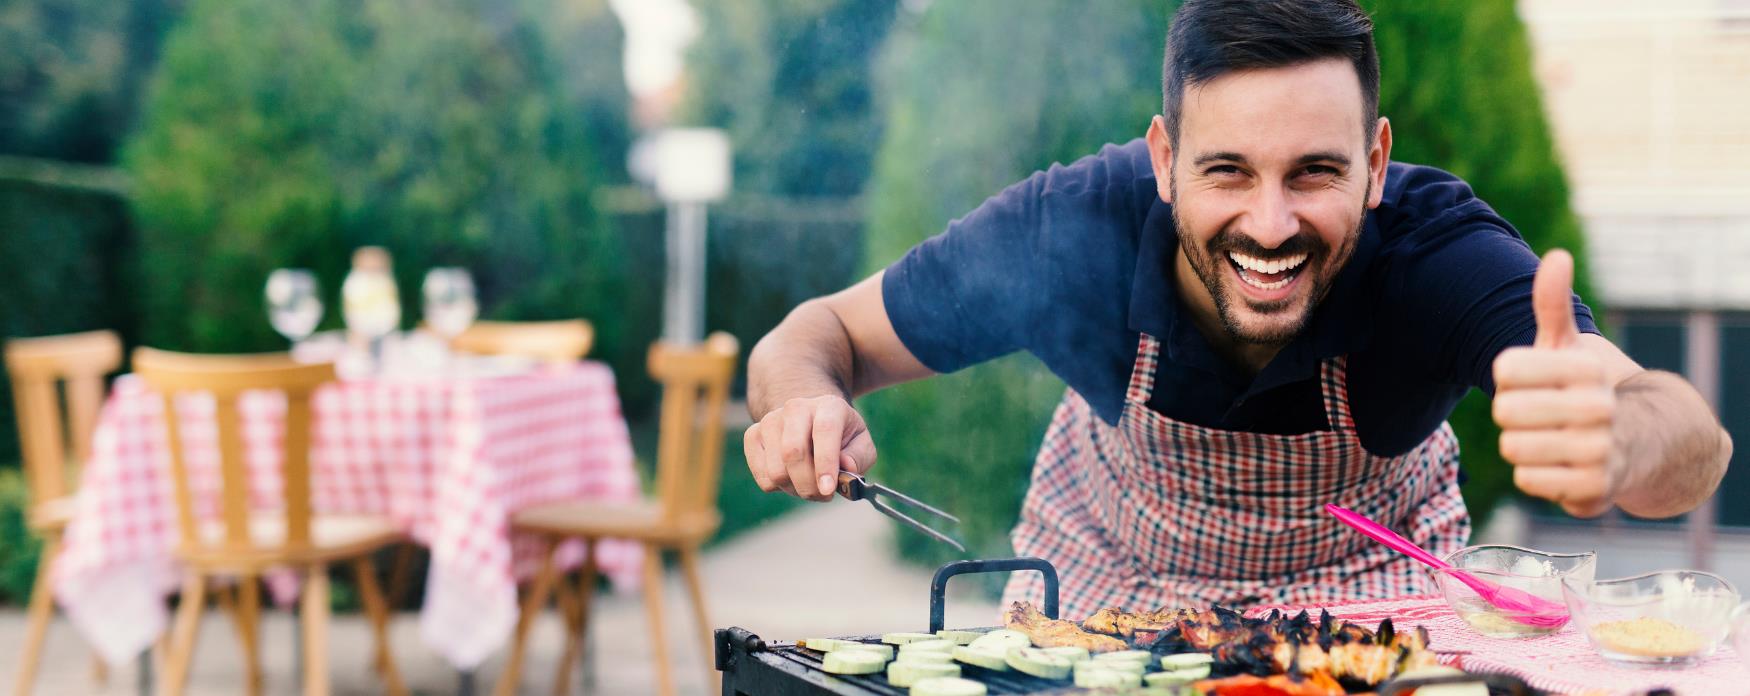 Man cooking barbecue gives a thumbs up